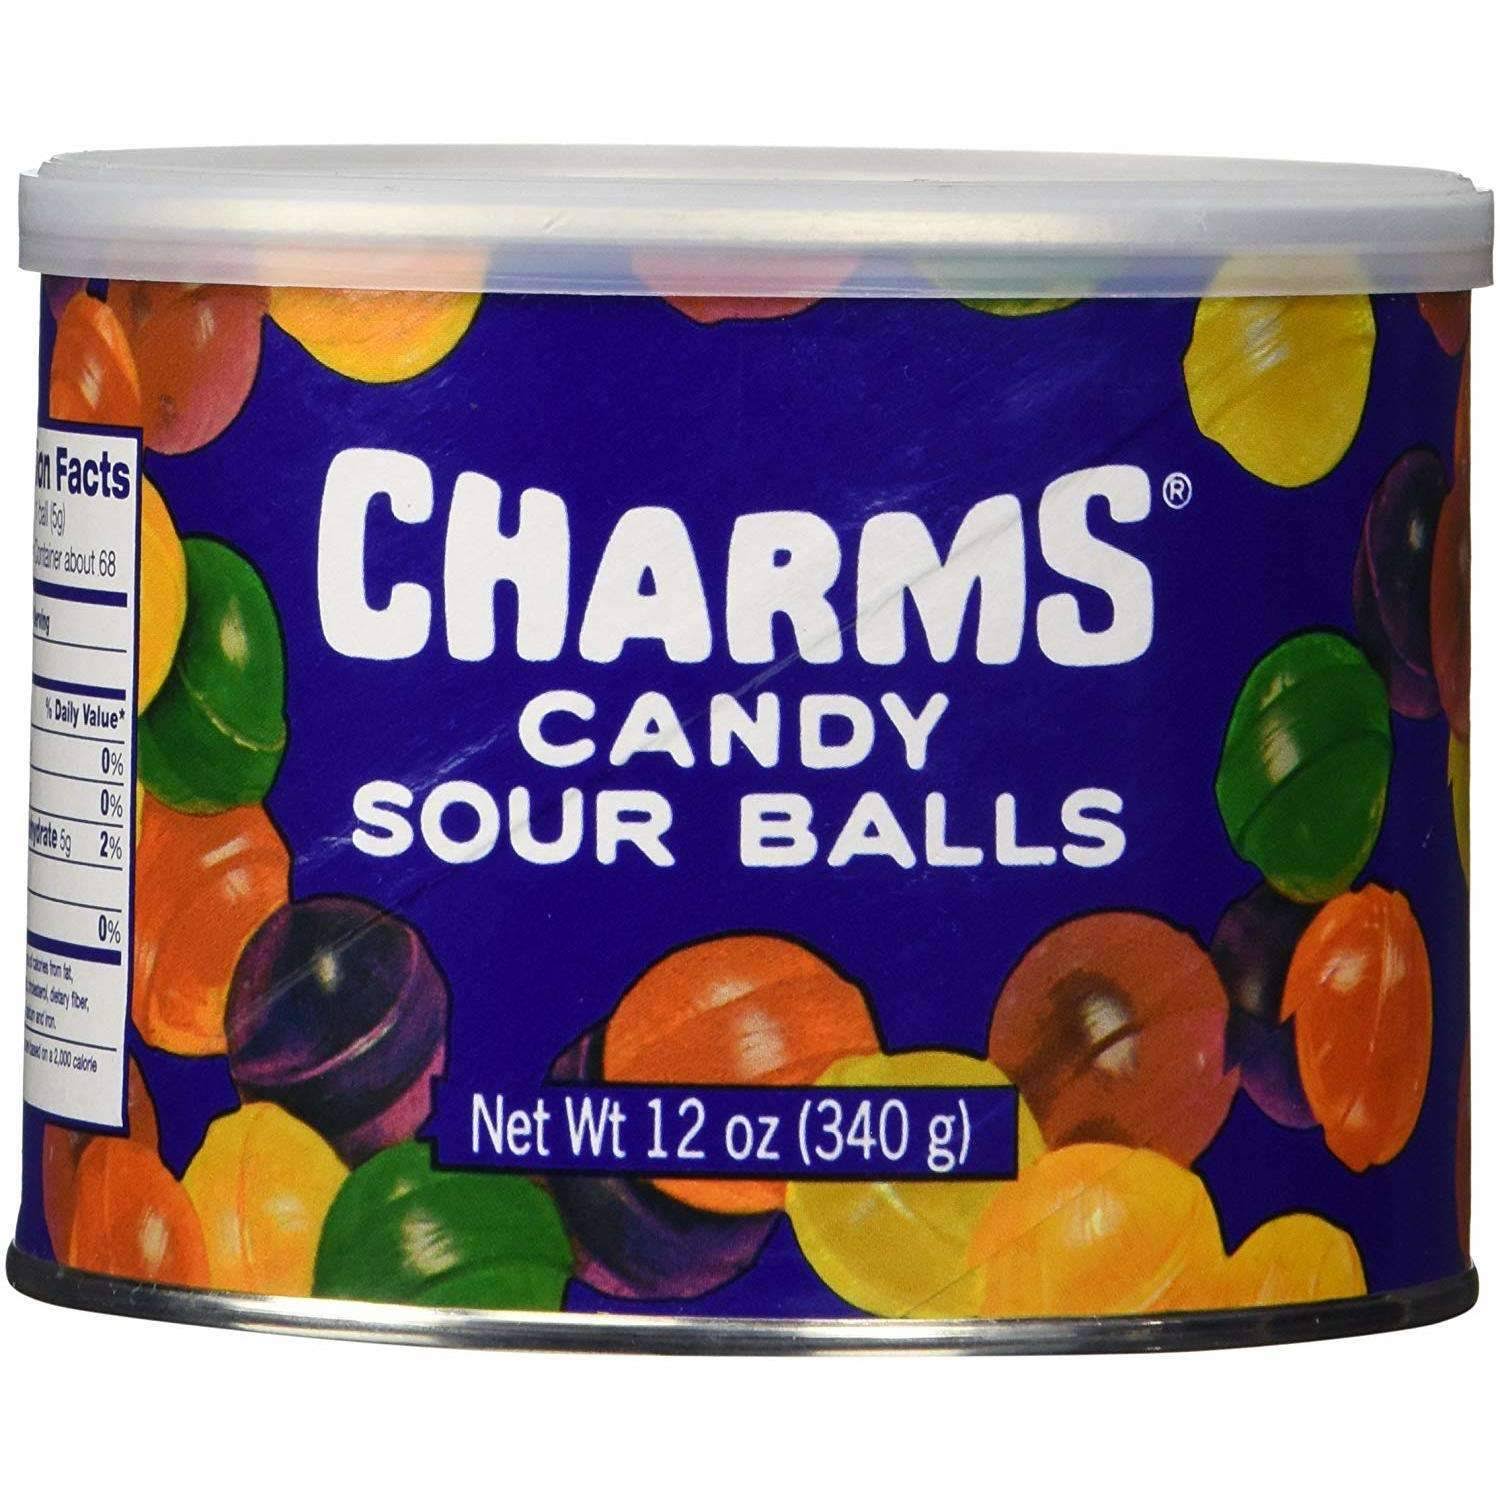 Charms Candy Sour Balls